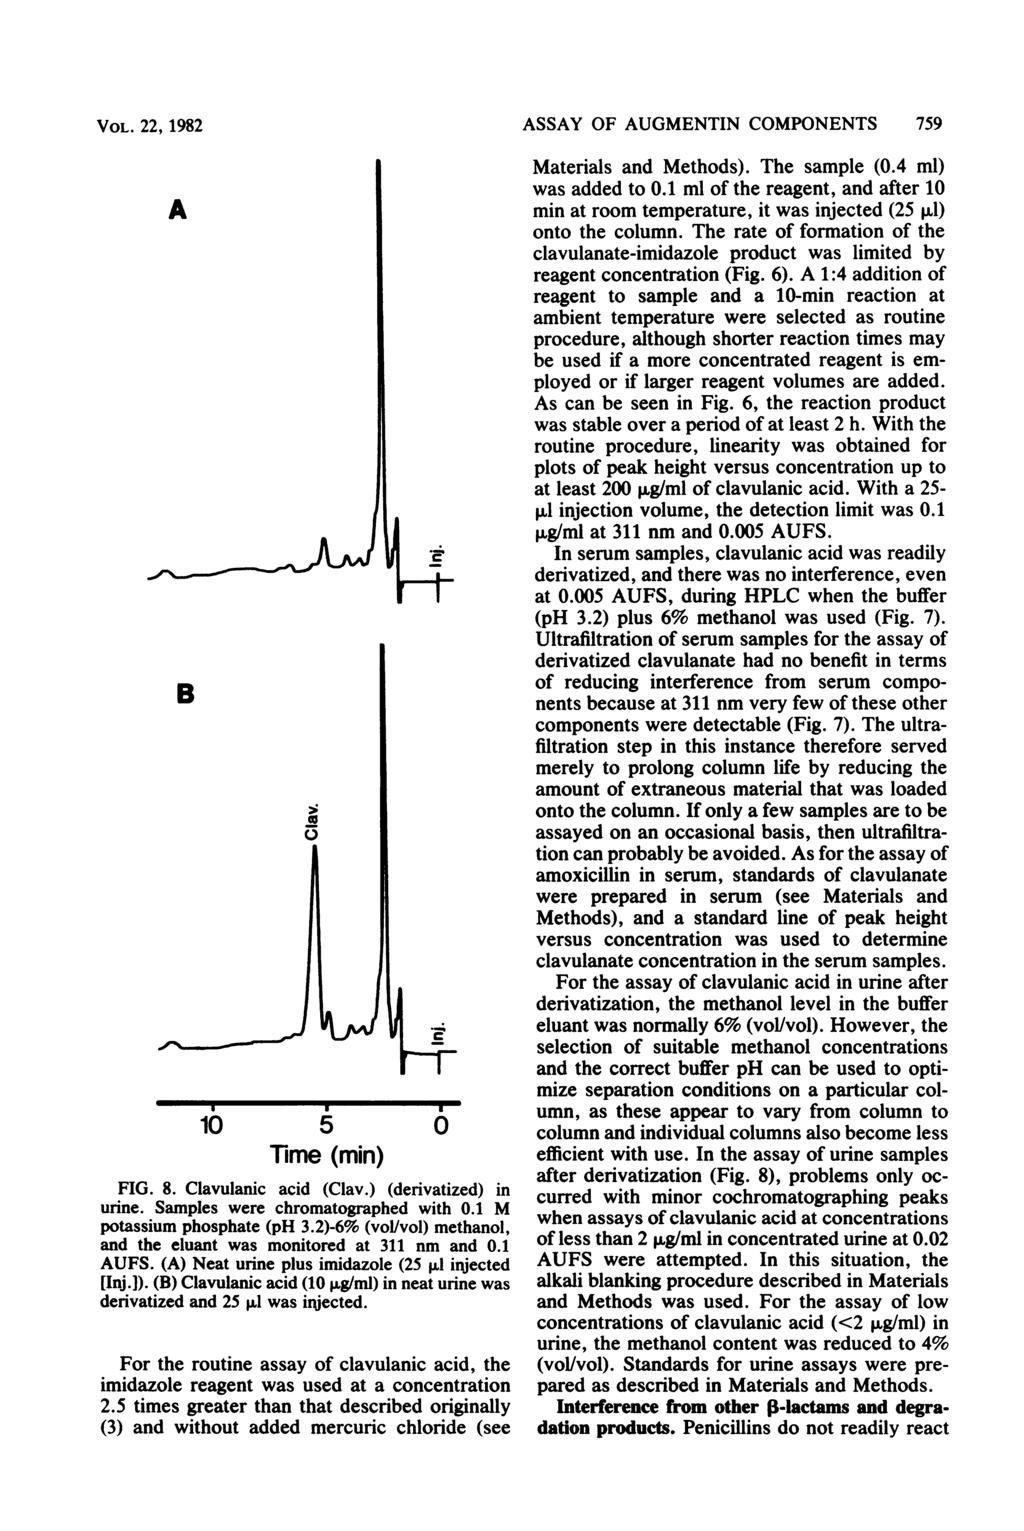 VOL. 22, 1982 A B lb 6 0 Time (min) FIG. 8. Clavulanic acid (Clav.) (derivatized) in urine. Samples were chromatographed with 0.1 M potassium phosphate (ph 3.